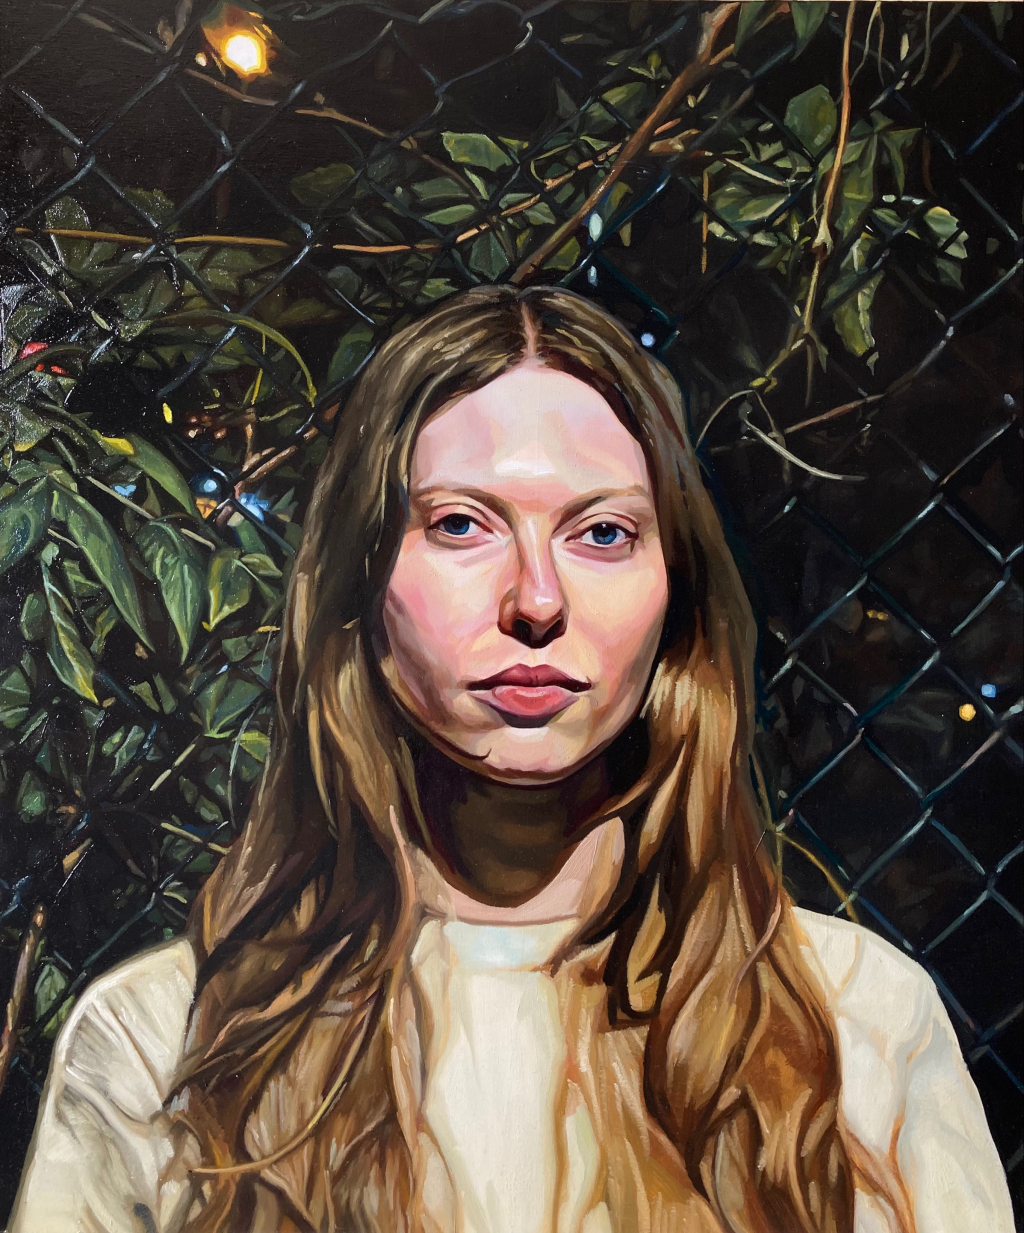 An oil painting of a portrait of a white woman leaning against a chainlink fence.